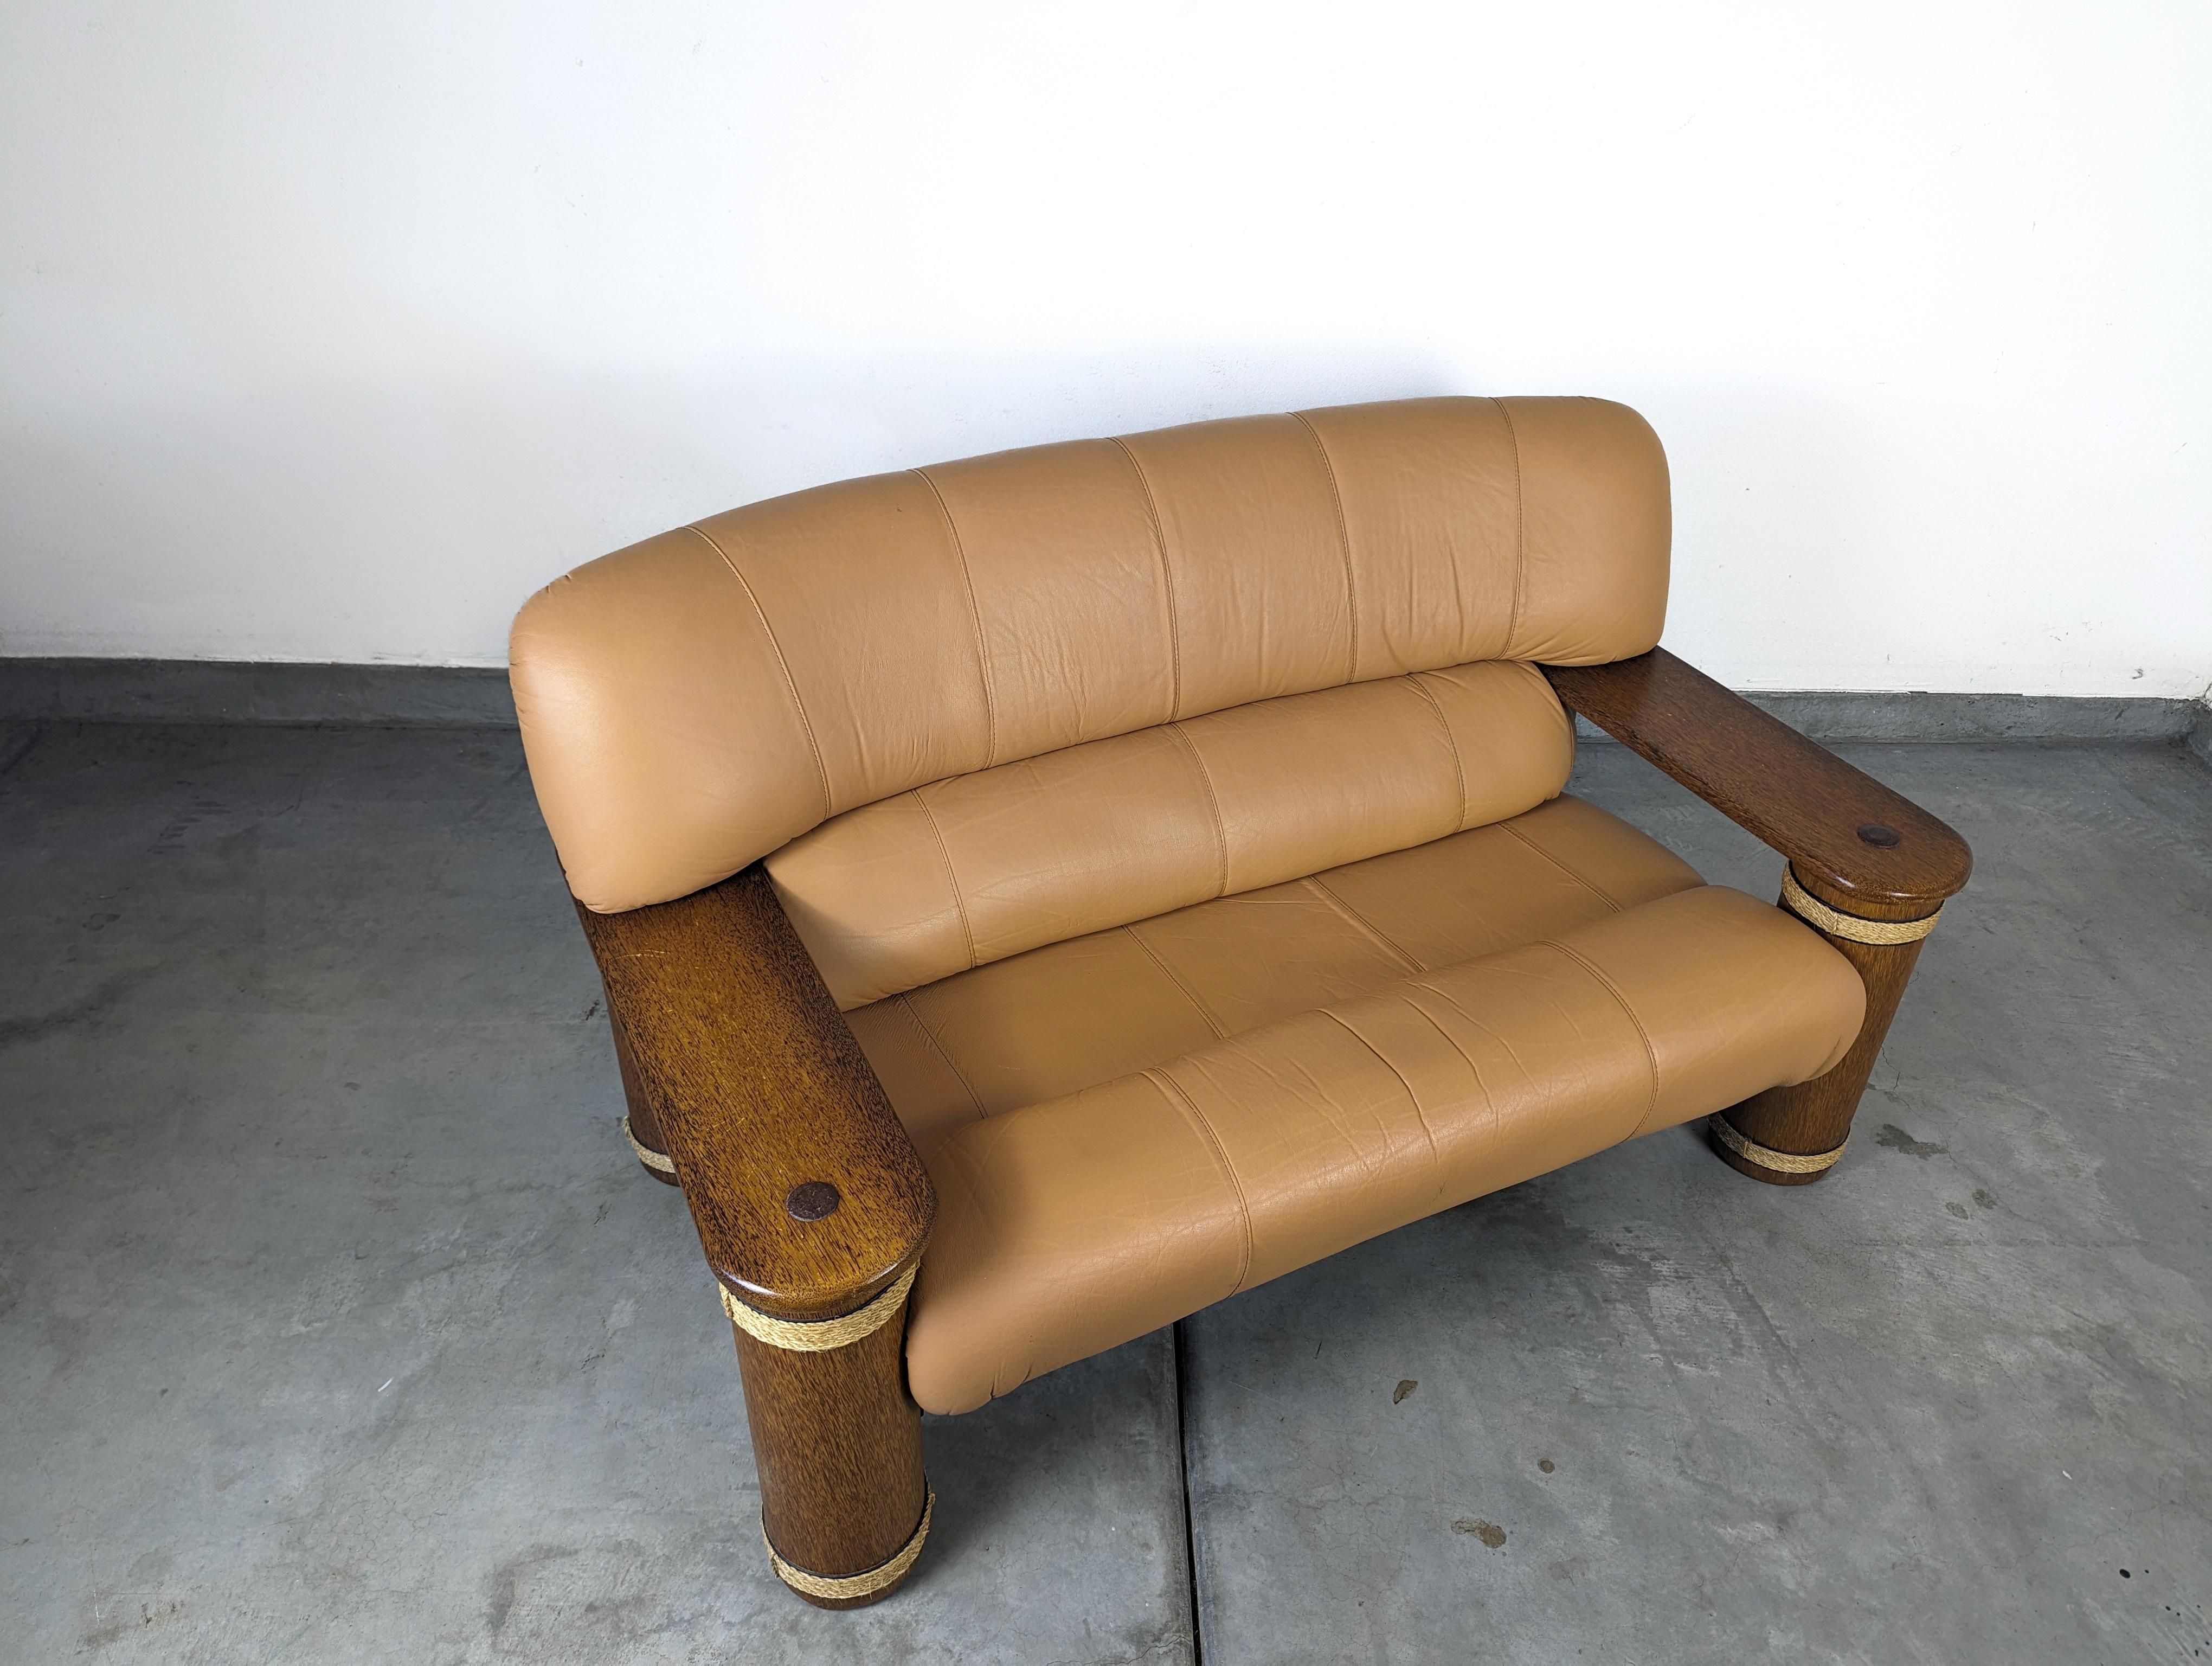 Vintage Leather and Palmwood Loveseat Sofa by Pacific Green, c1990s For Sale 1